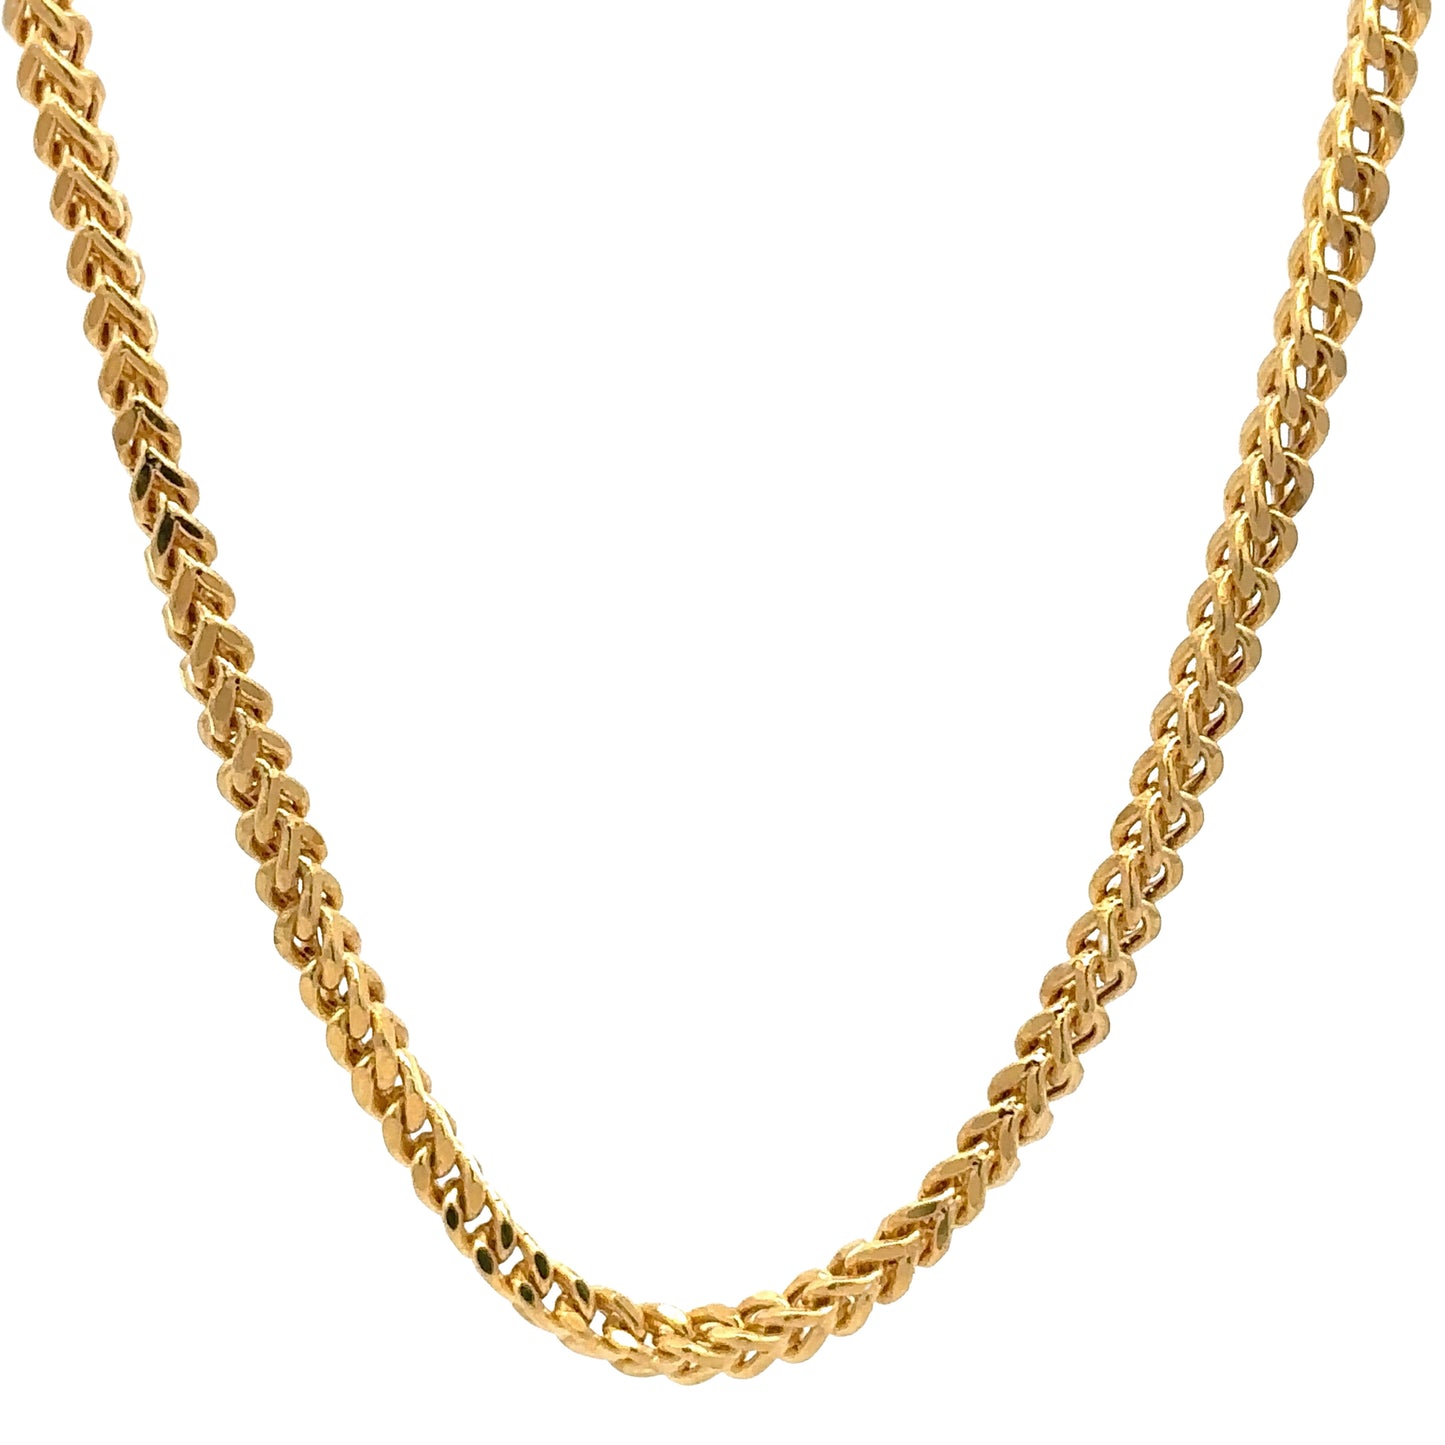 Hanging yellow gold square Franco chain